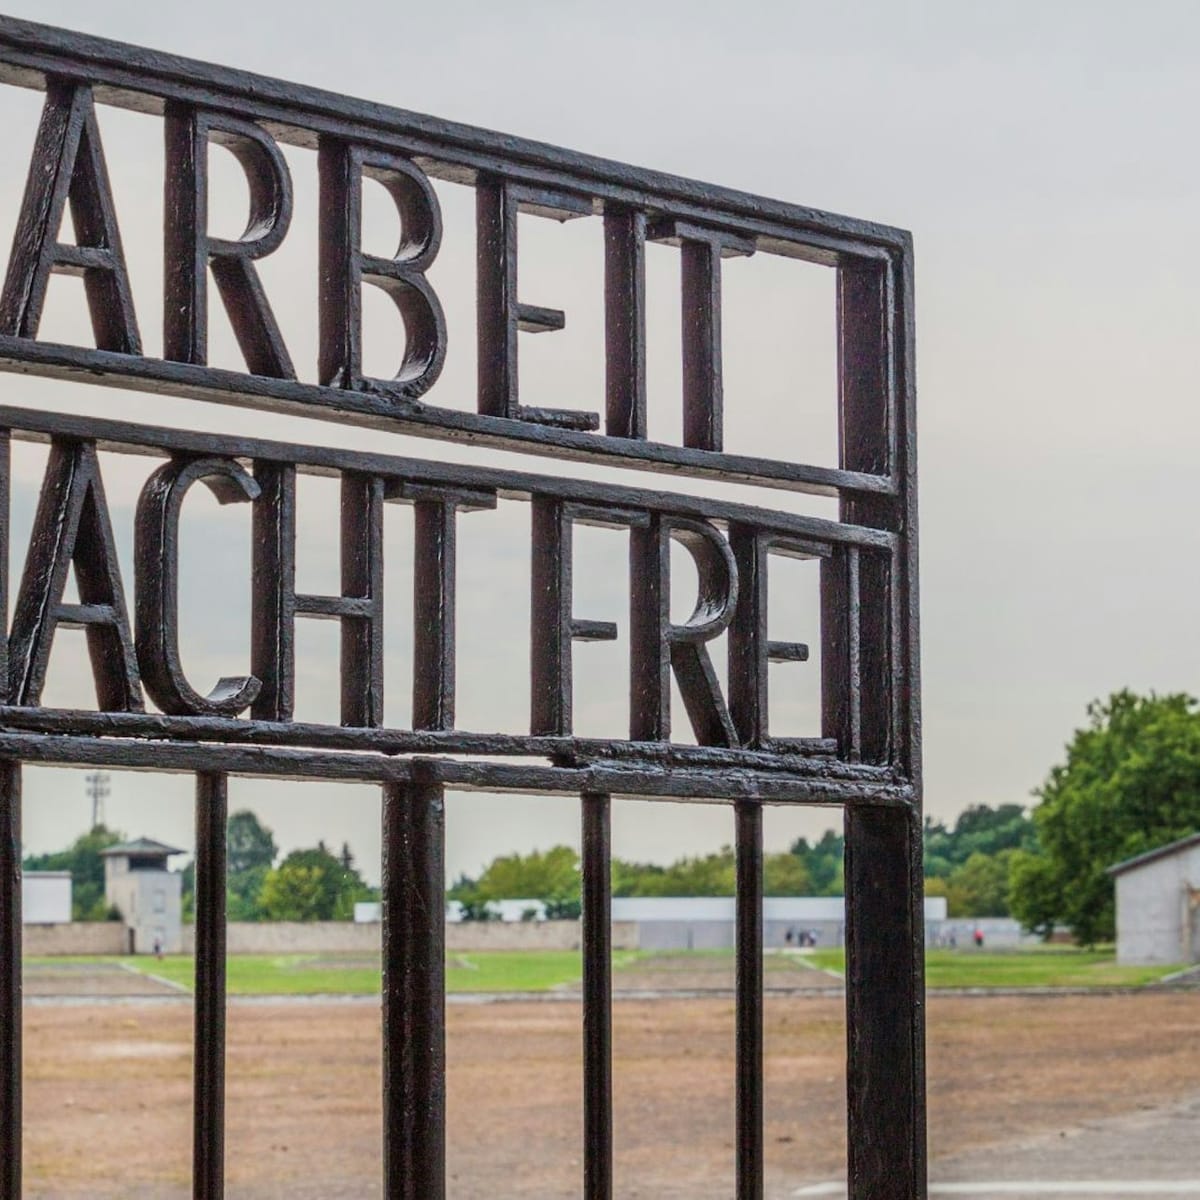 sachsenhausen-concentration-camp-memorial-guided-tour-from-berlin_1